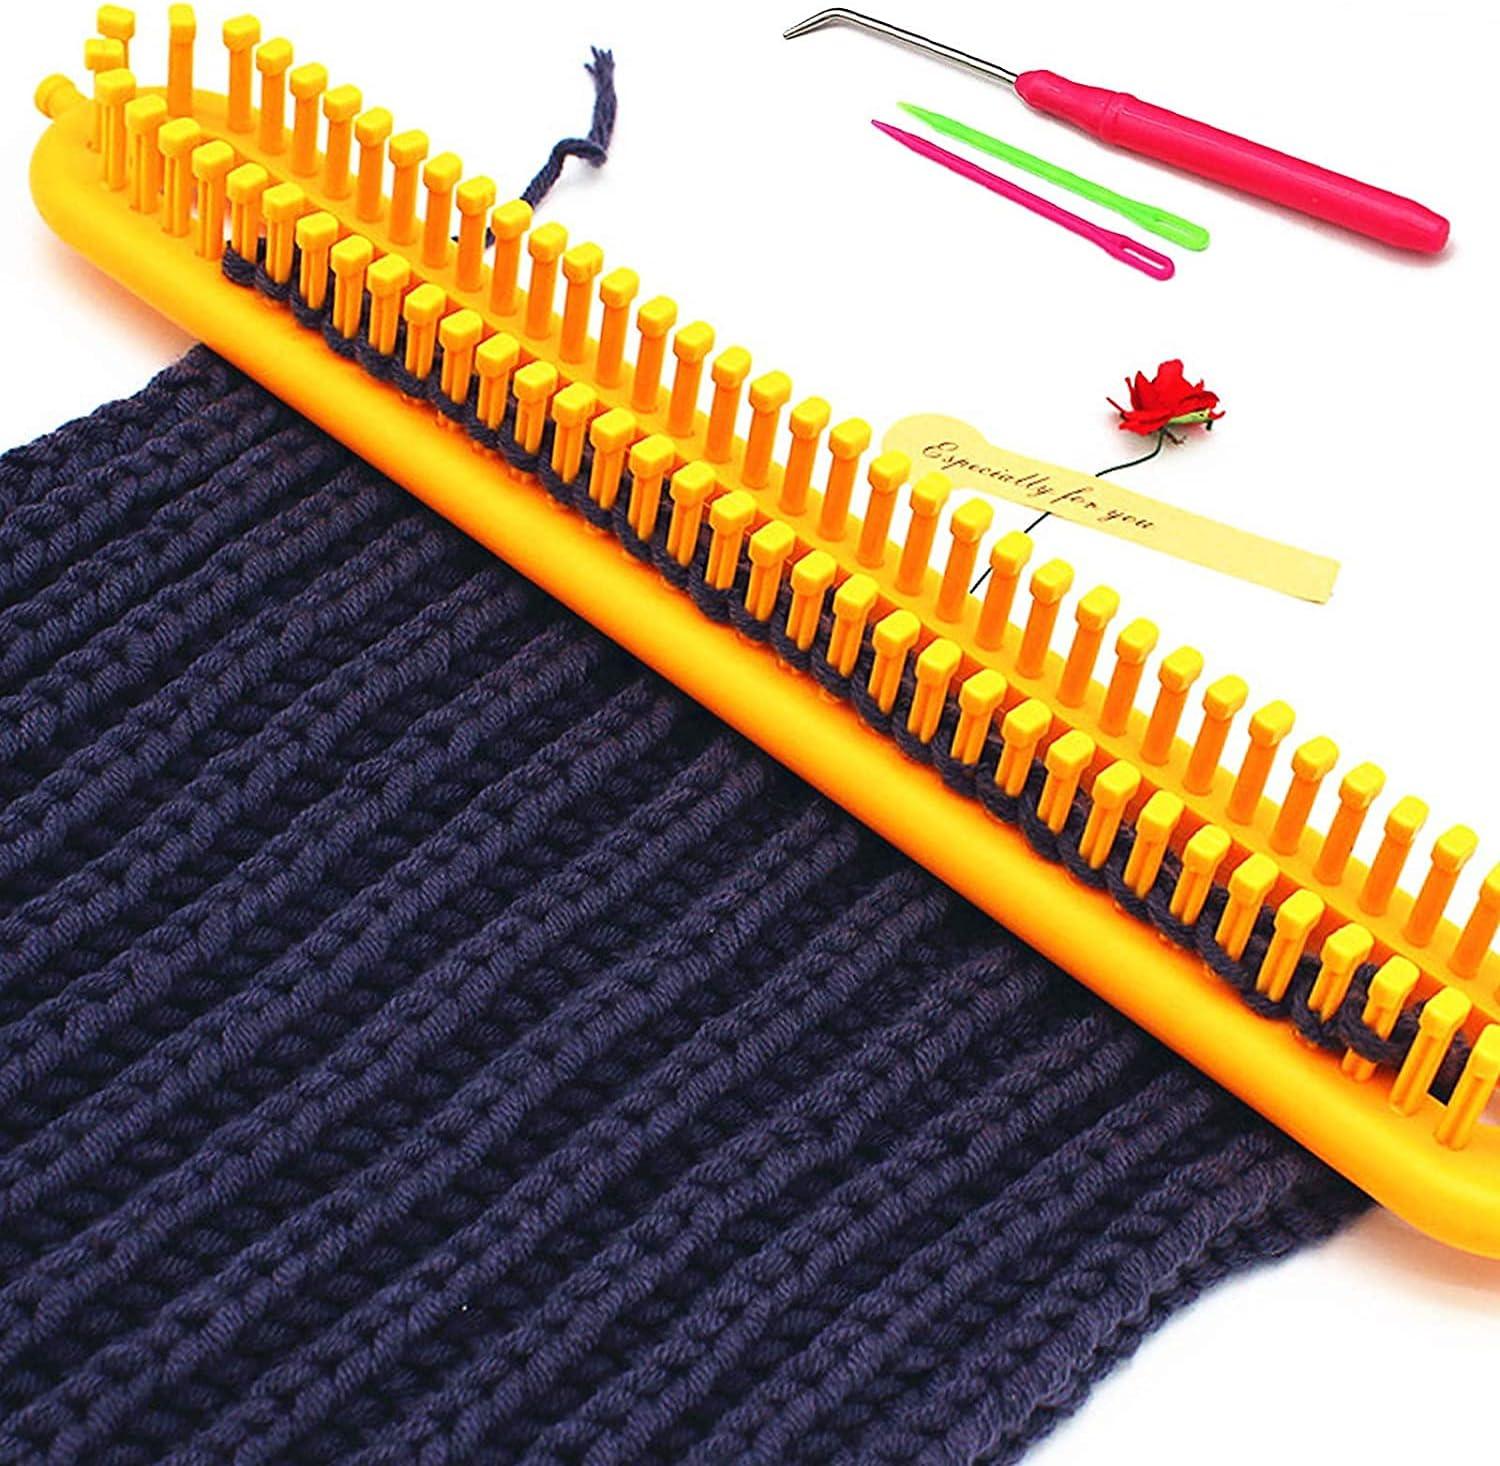 JCBIZ Rectangle Knitting Looms Plastic Weaving Looms Set Scarf Hats DIY  Crocheting Handmade Craft Kit with a Crochet Hook and Needle for Knitting